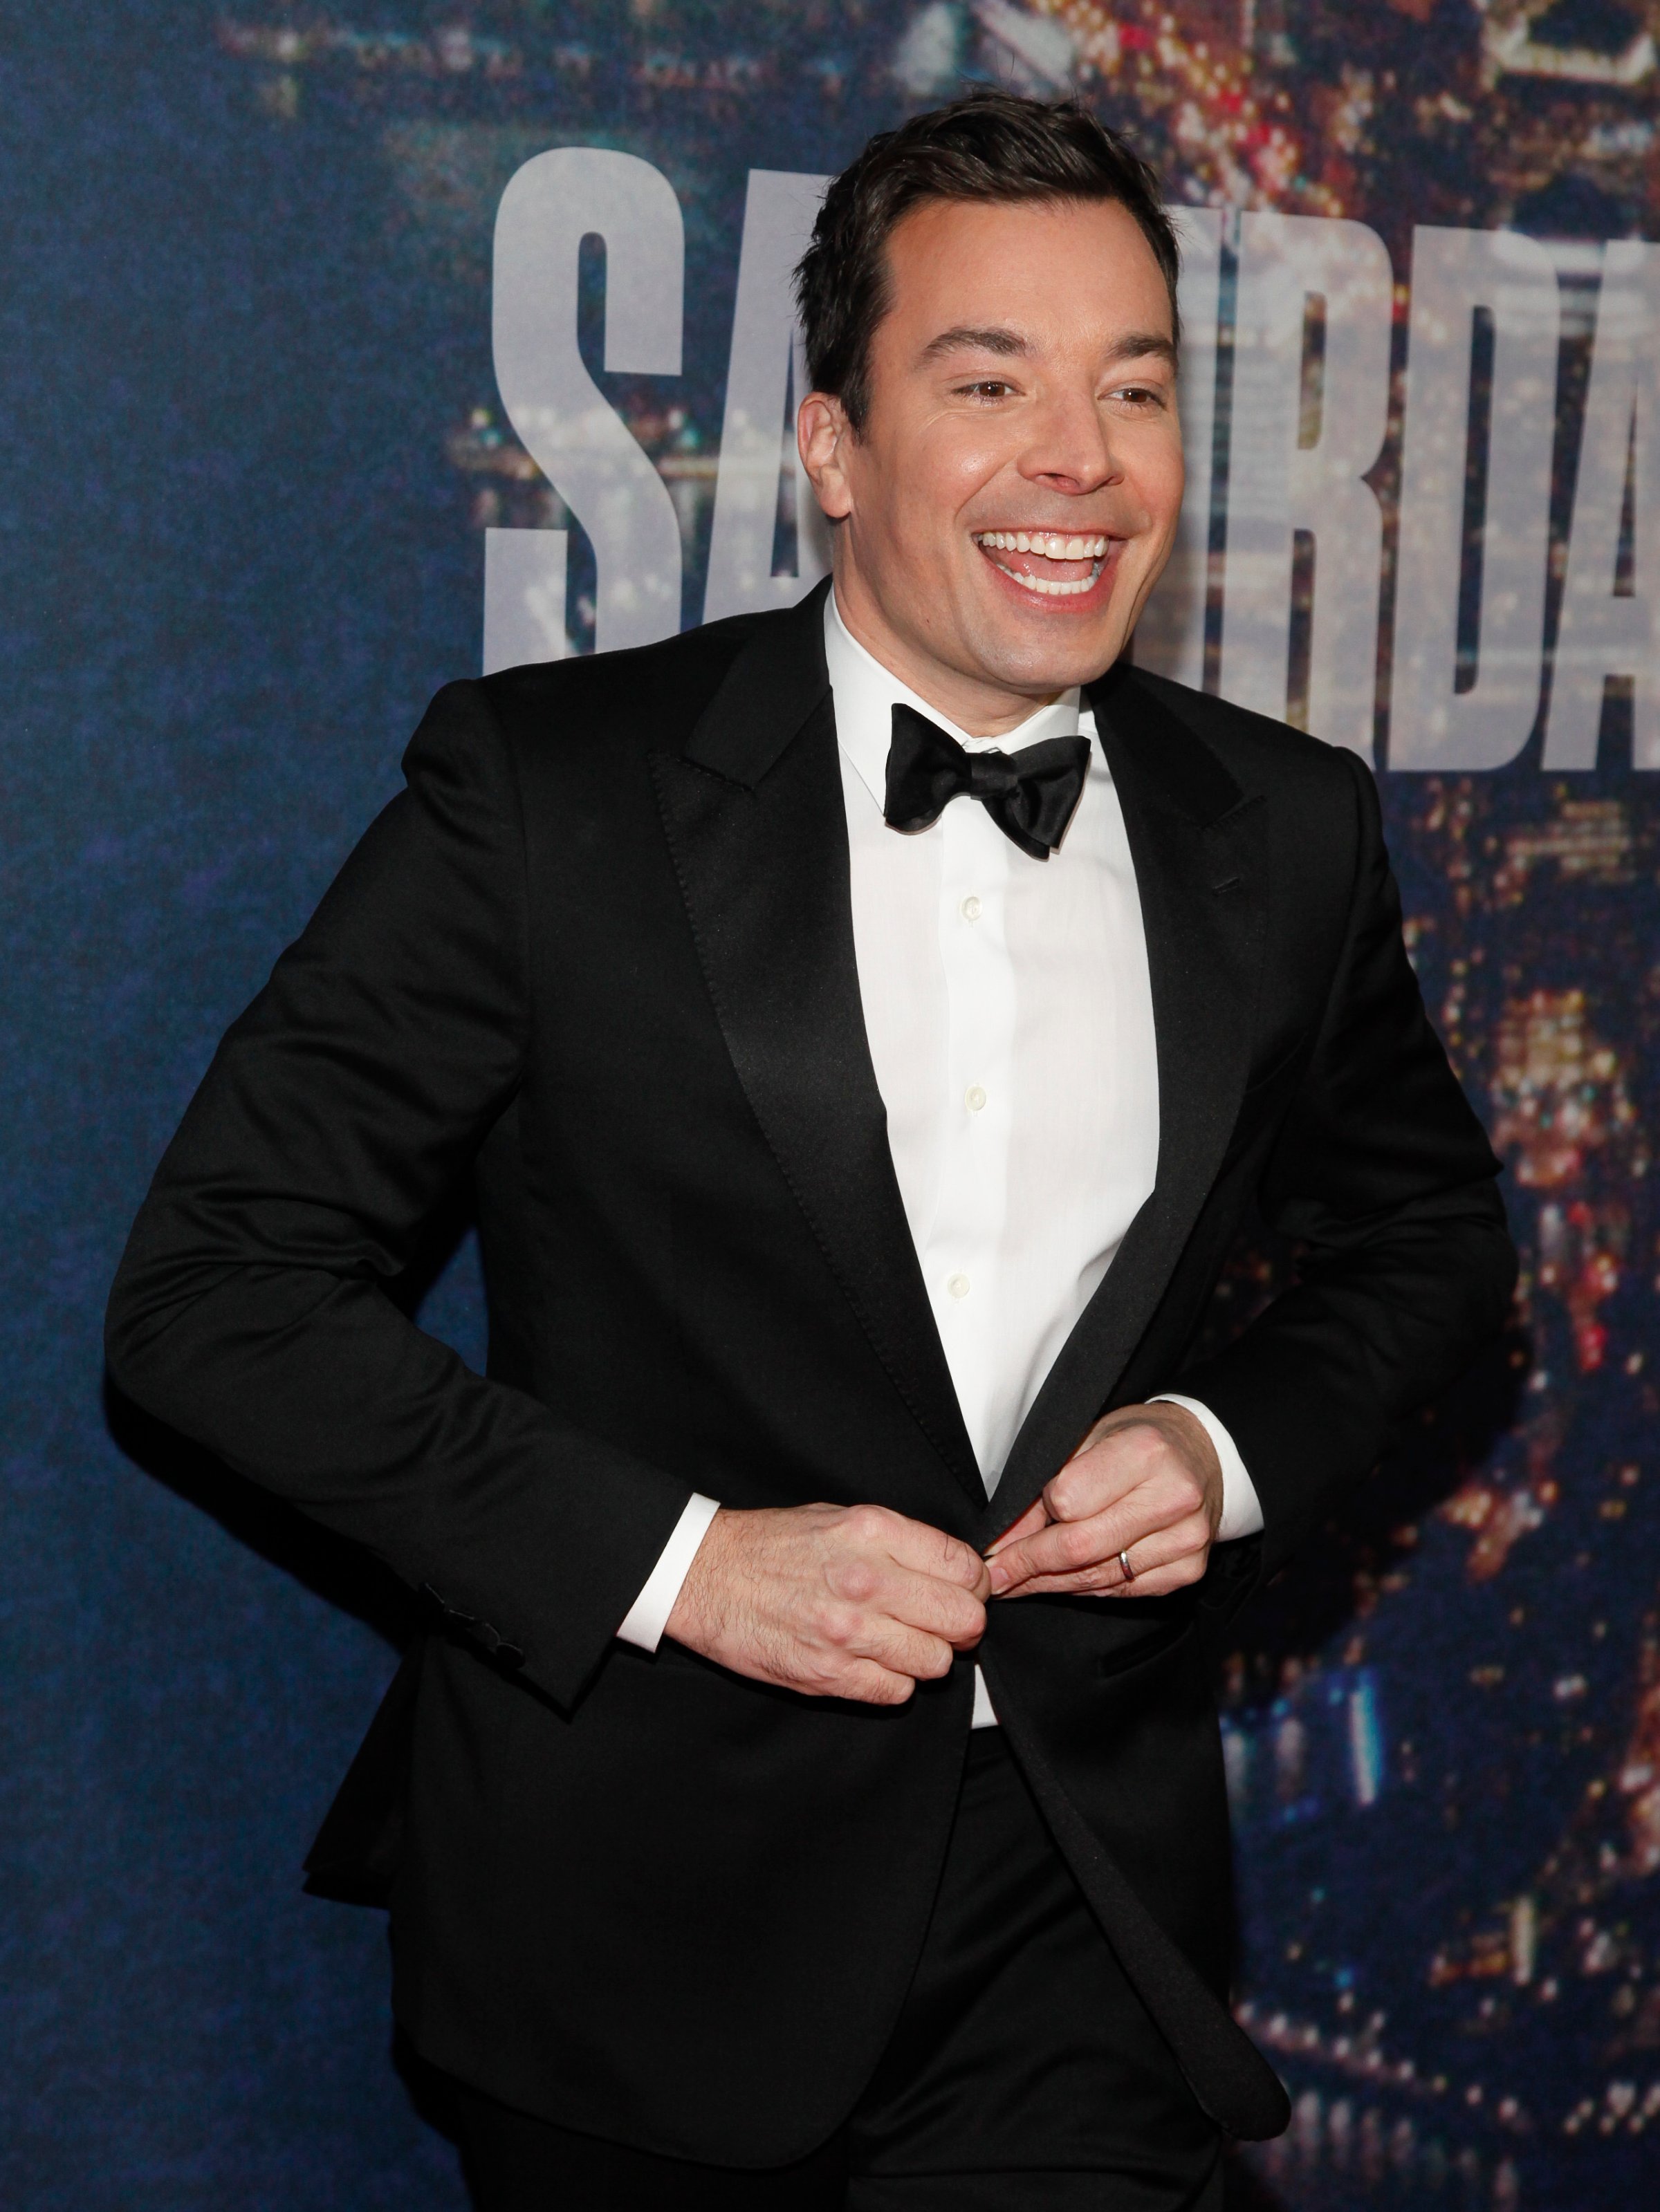 Jimmy Fallon attends the SNL 40th Anniversary Special at Rockefeller Plaza in New York City on Feb. 15, 2015.